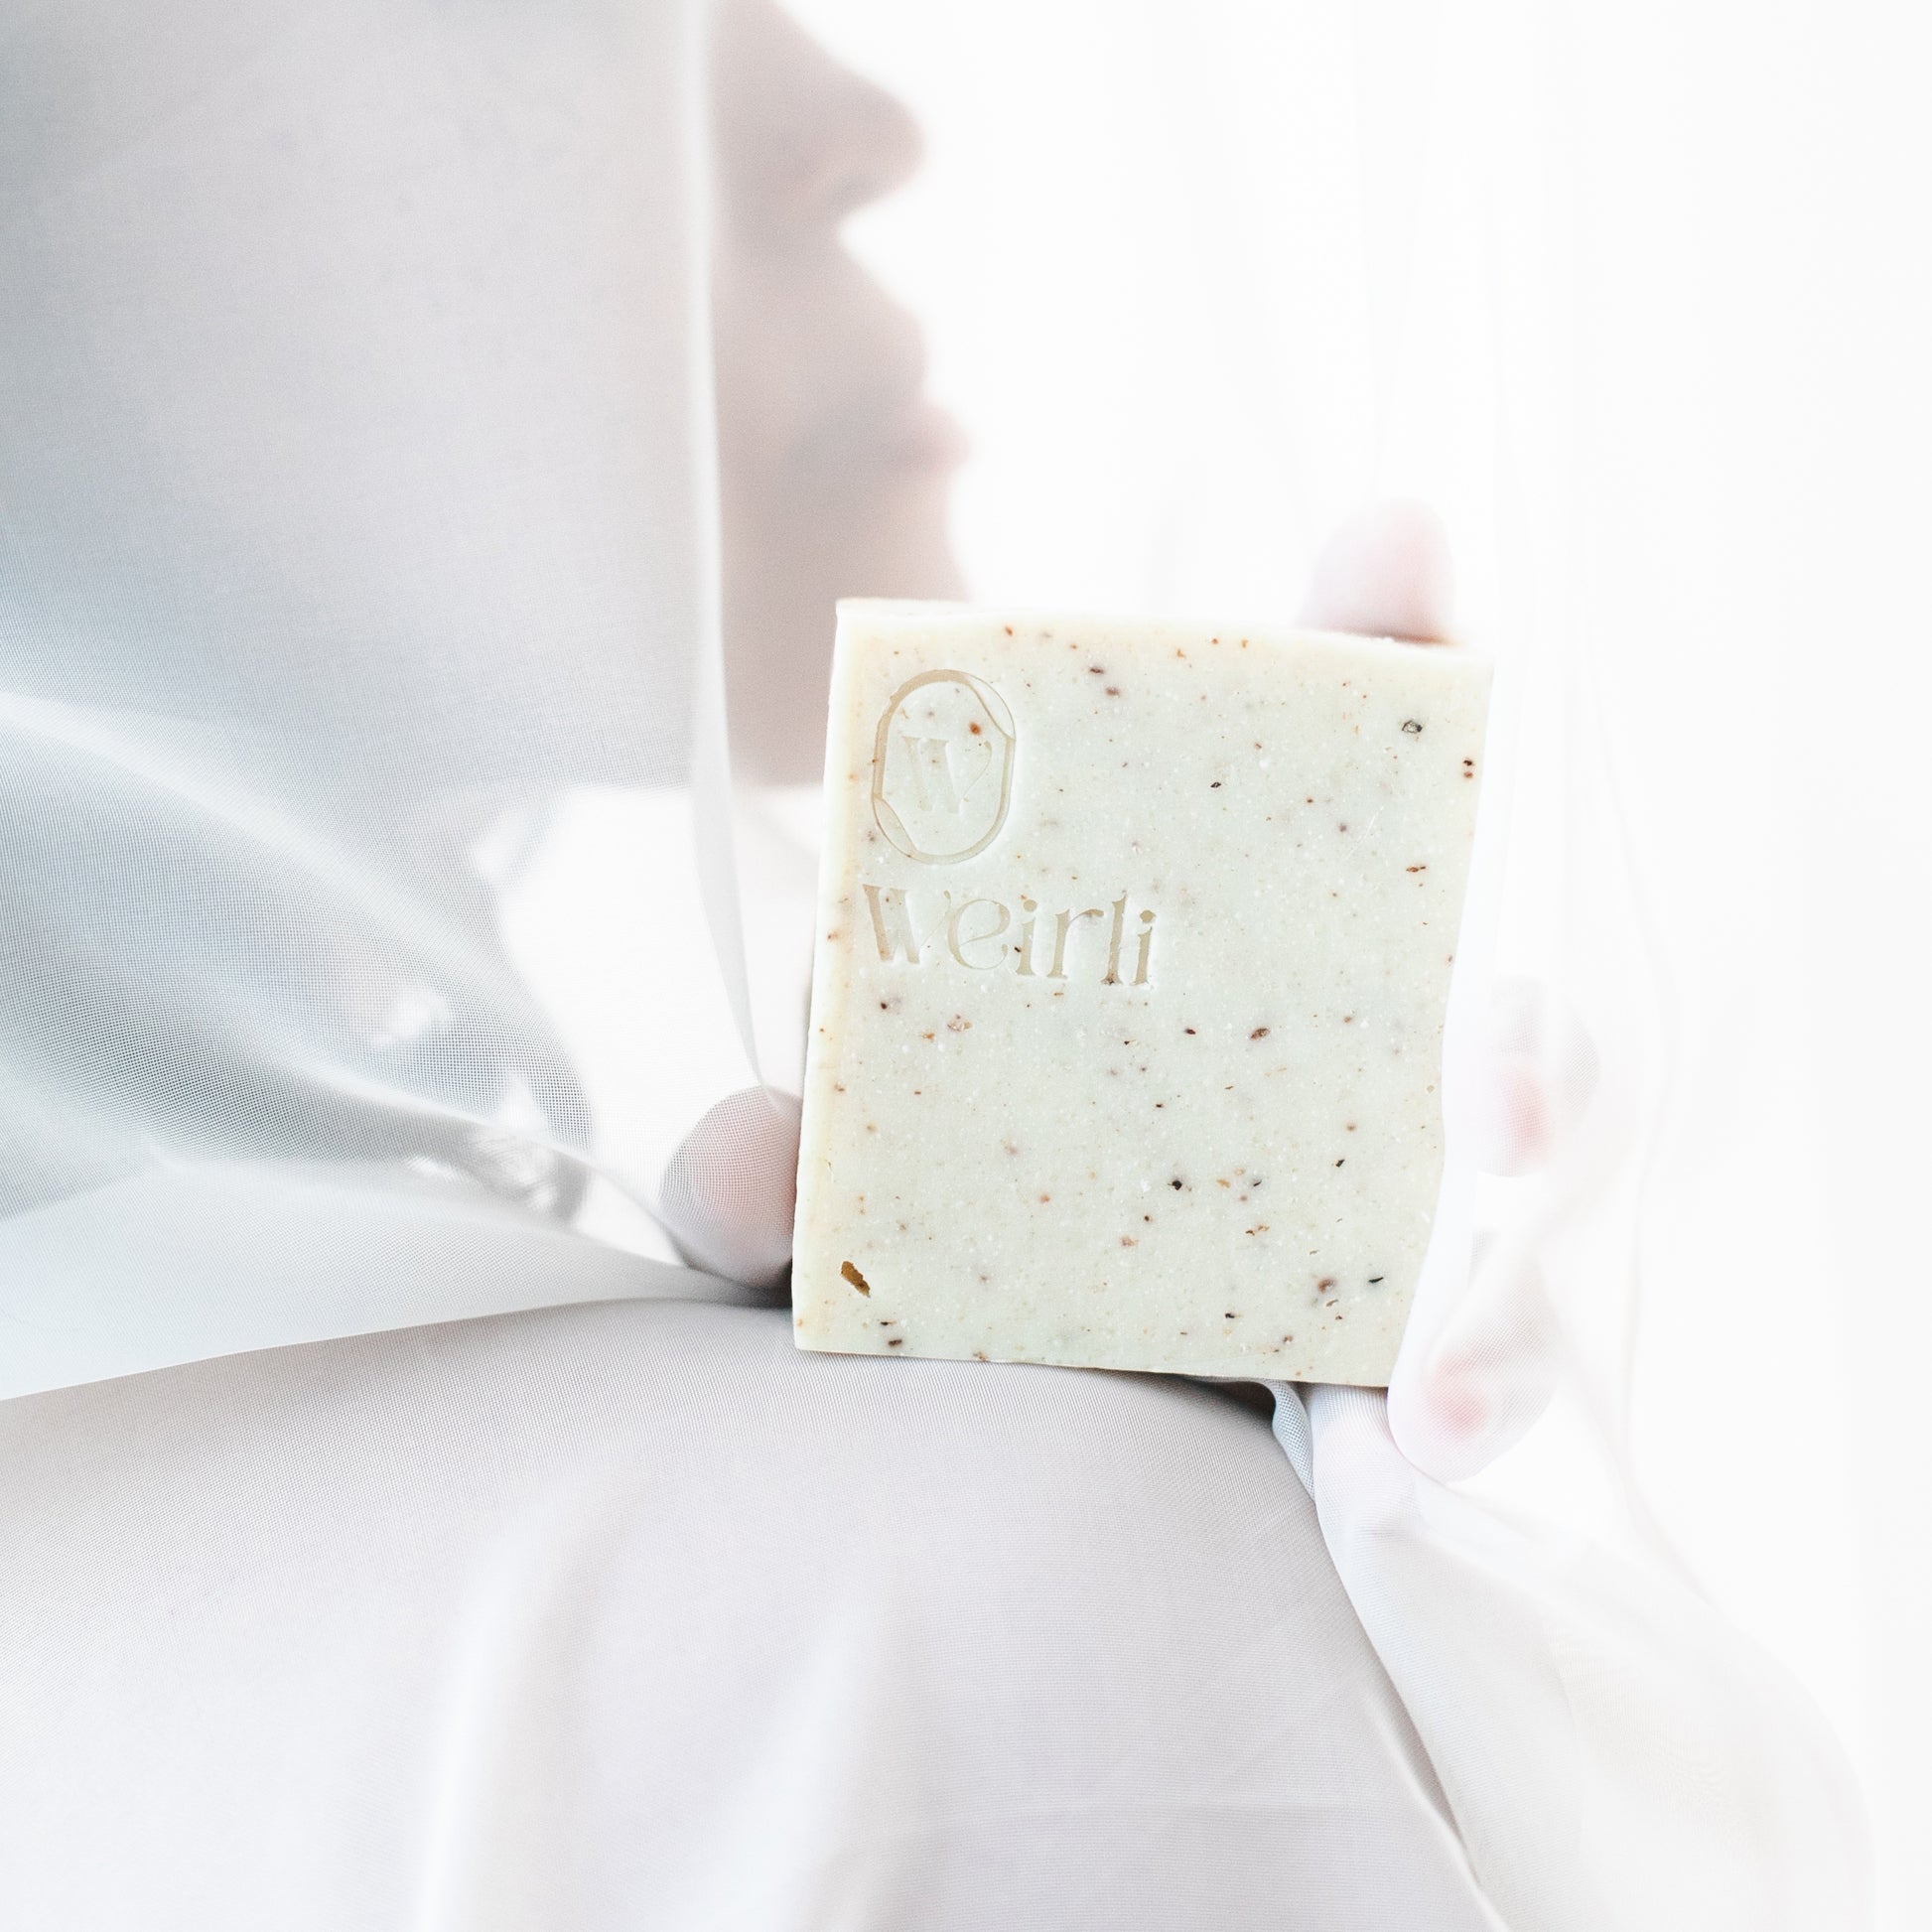 Classic campaign - rice and black pepper soap square held up by a hand